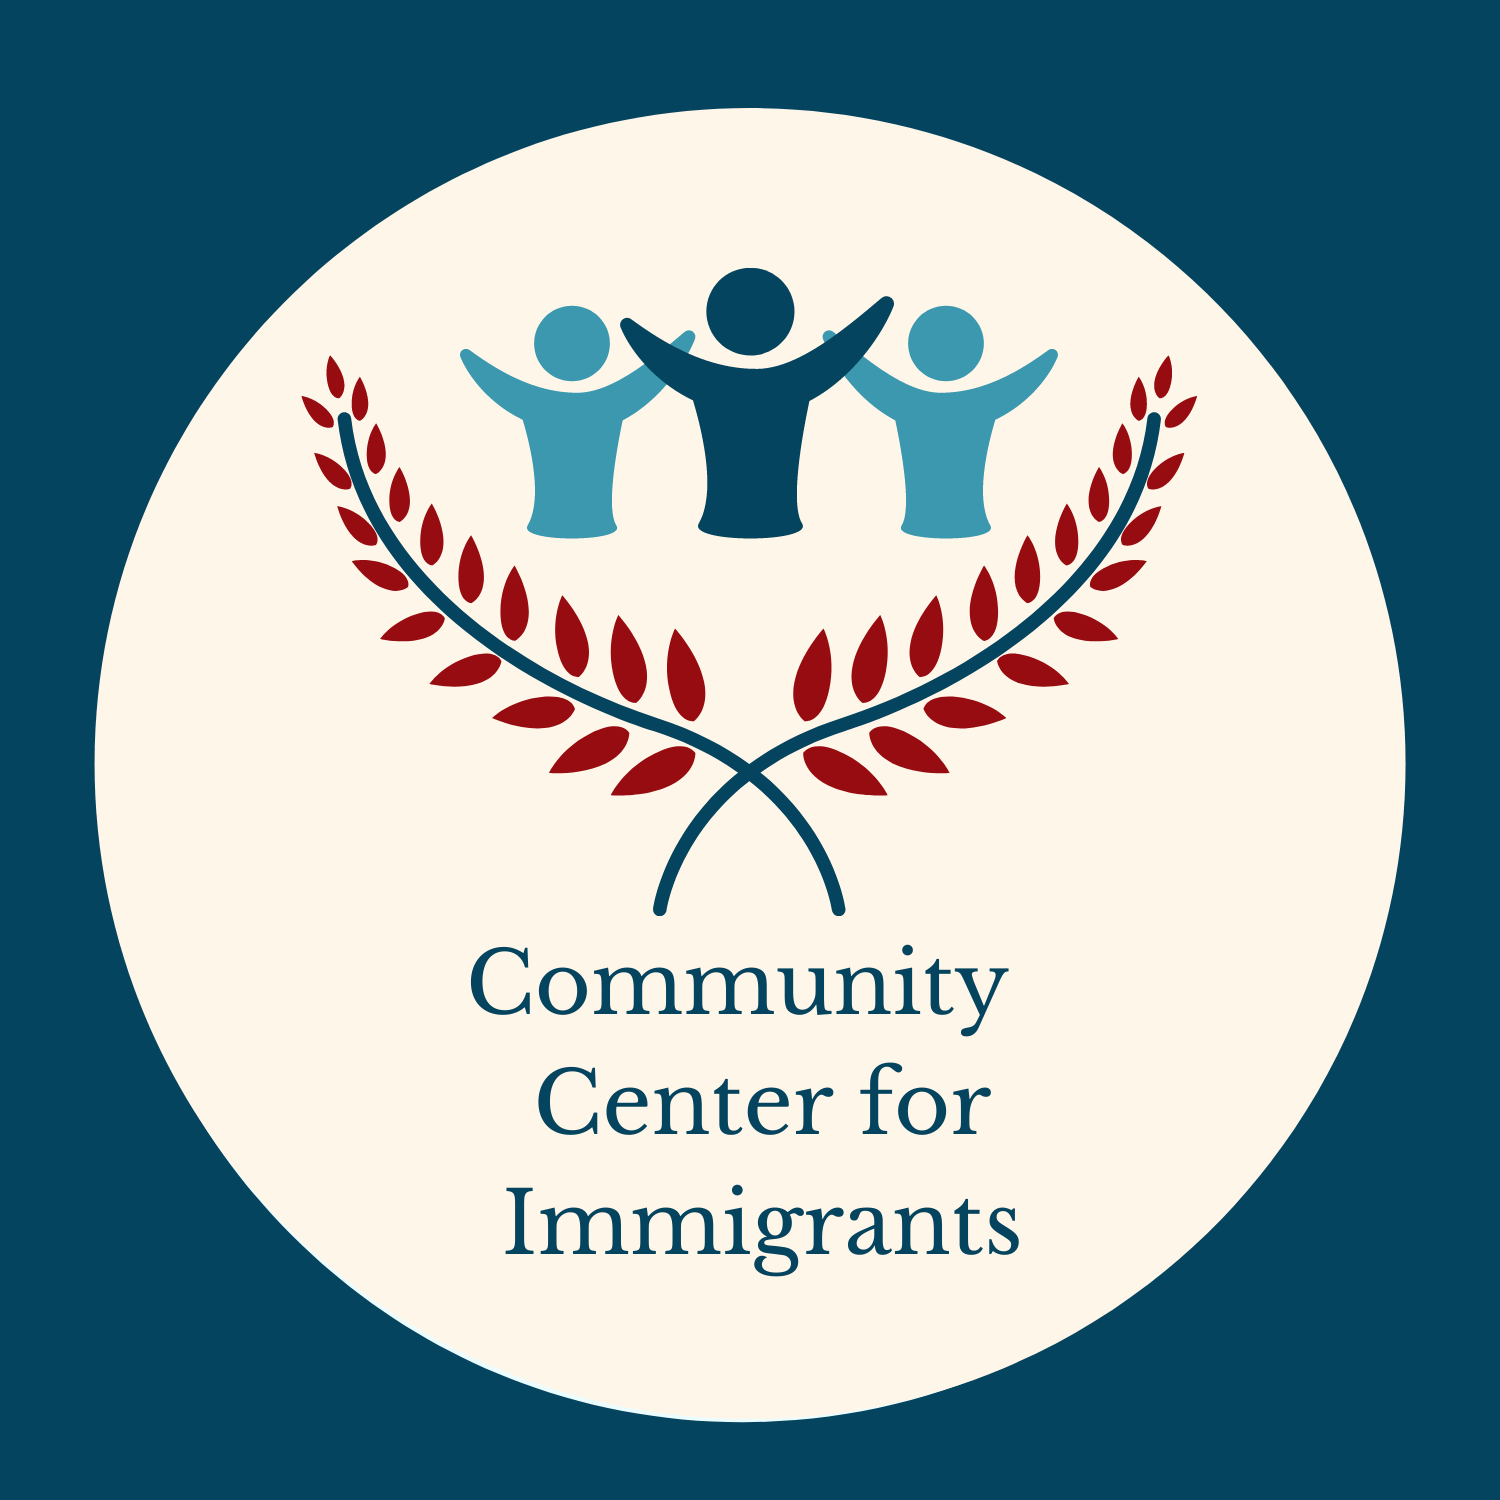 Community Center for Immigrants